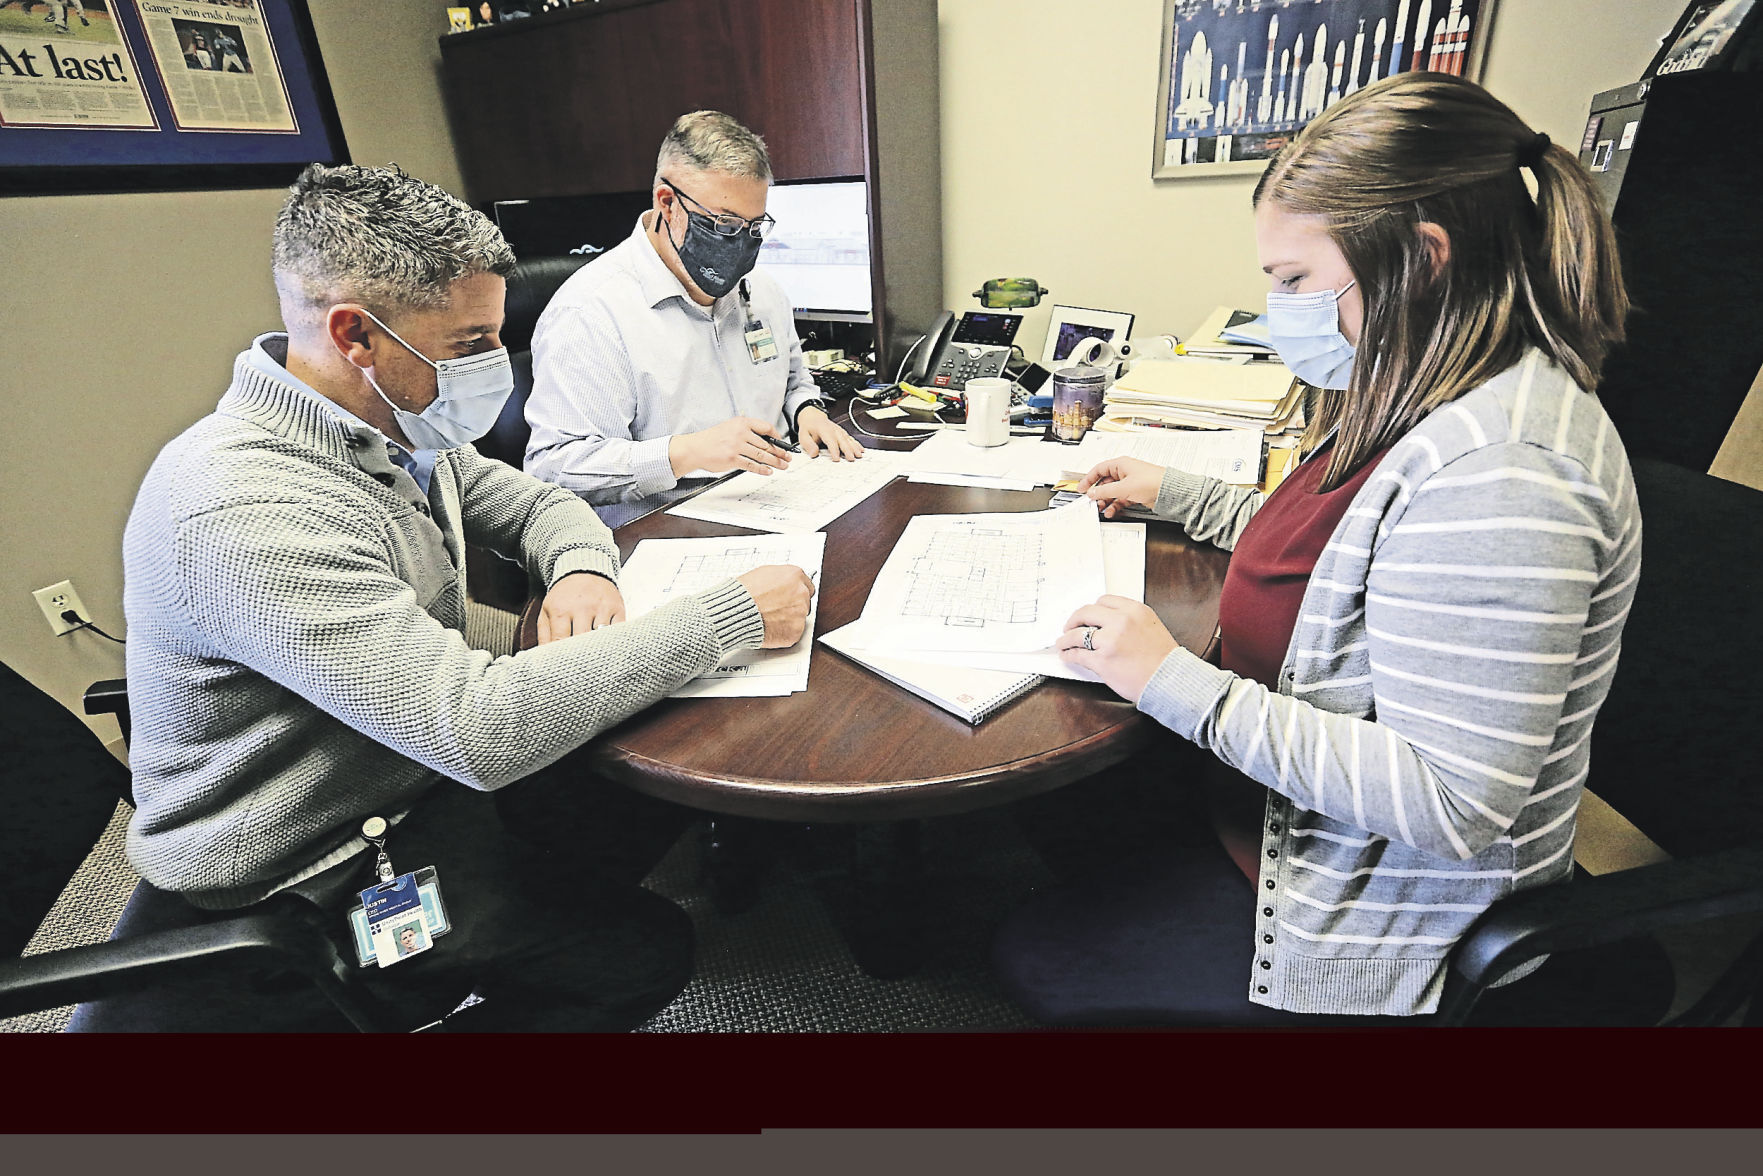 Justin Hafner (from left), CEO of Grand River Medical Group, Joel Gehling, CFO, and Kelly Goldsmith, executive assistant, go over paperwork at the facility in Dubuque. PHOTO CREDIT: Jessica Reilly